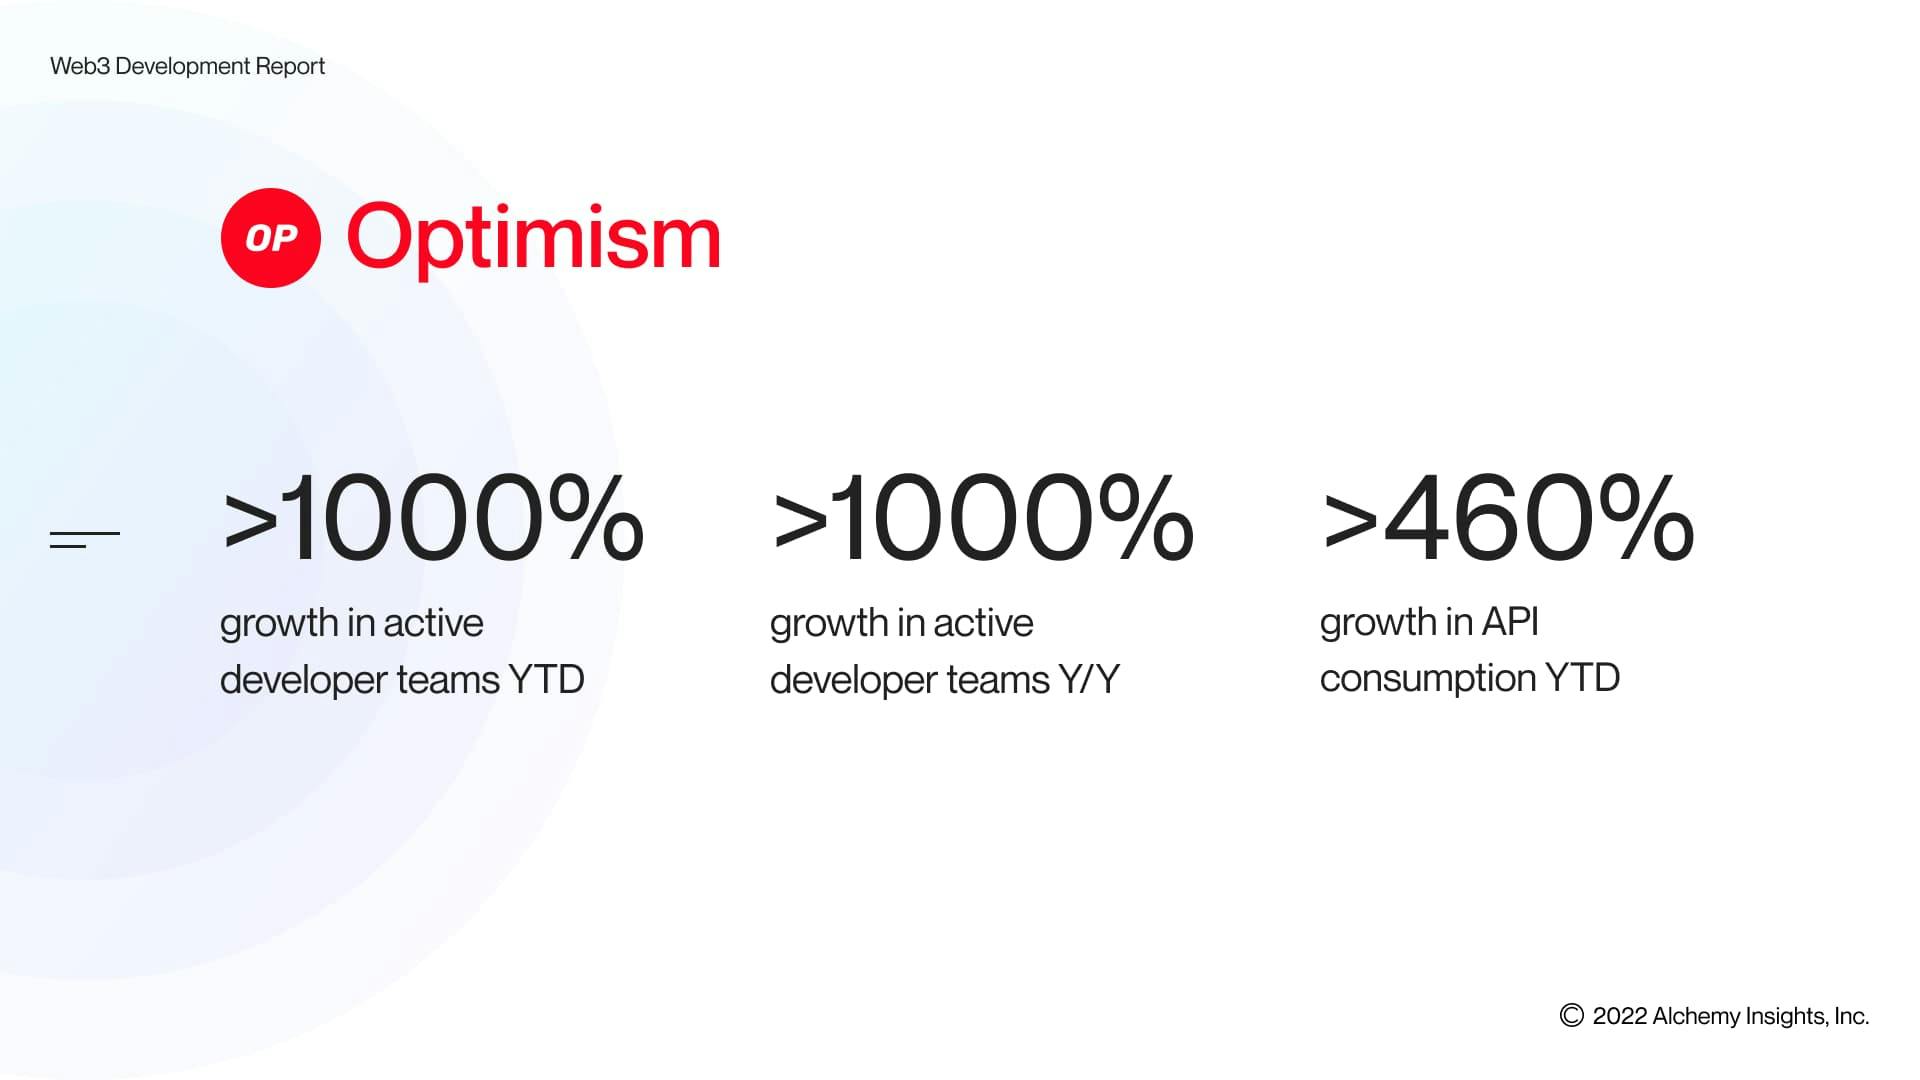 Optimism developer growth as of Q3 2022.